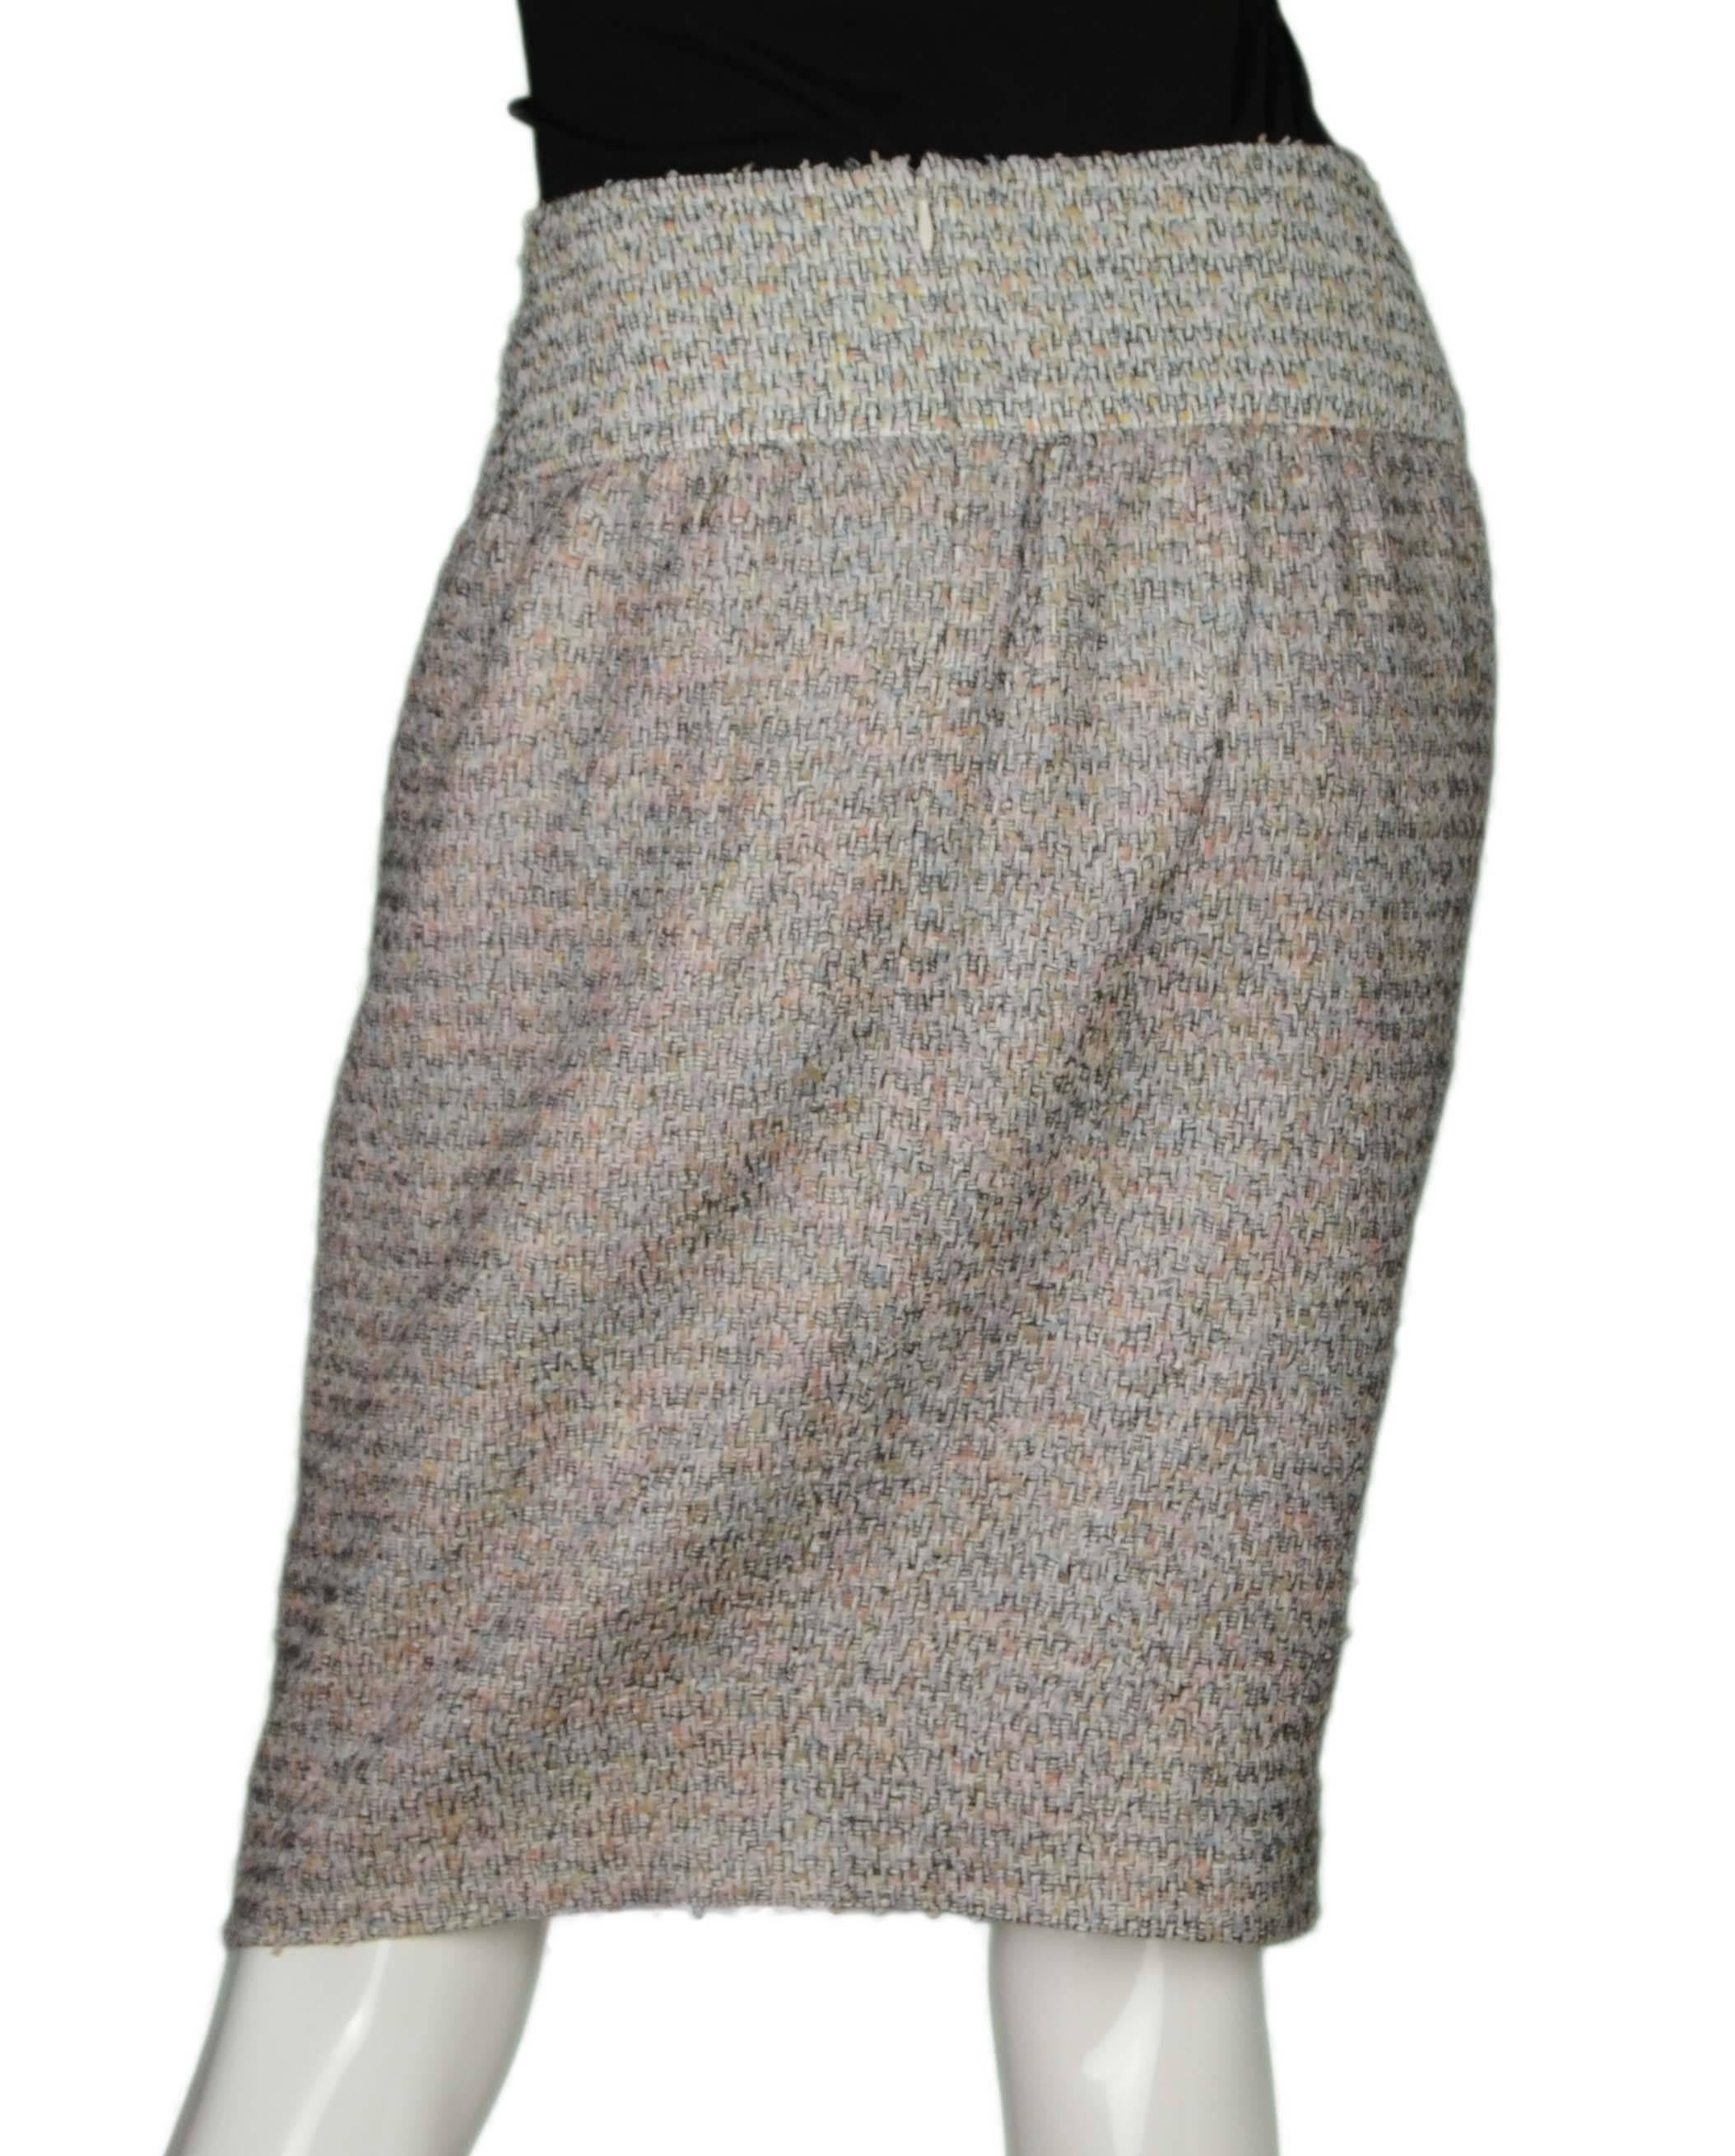 Chanel Multi-Colored Tweed Skirt Suit sz 48 1